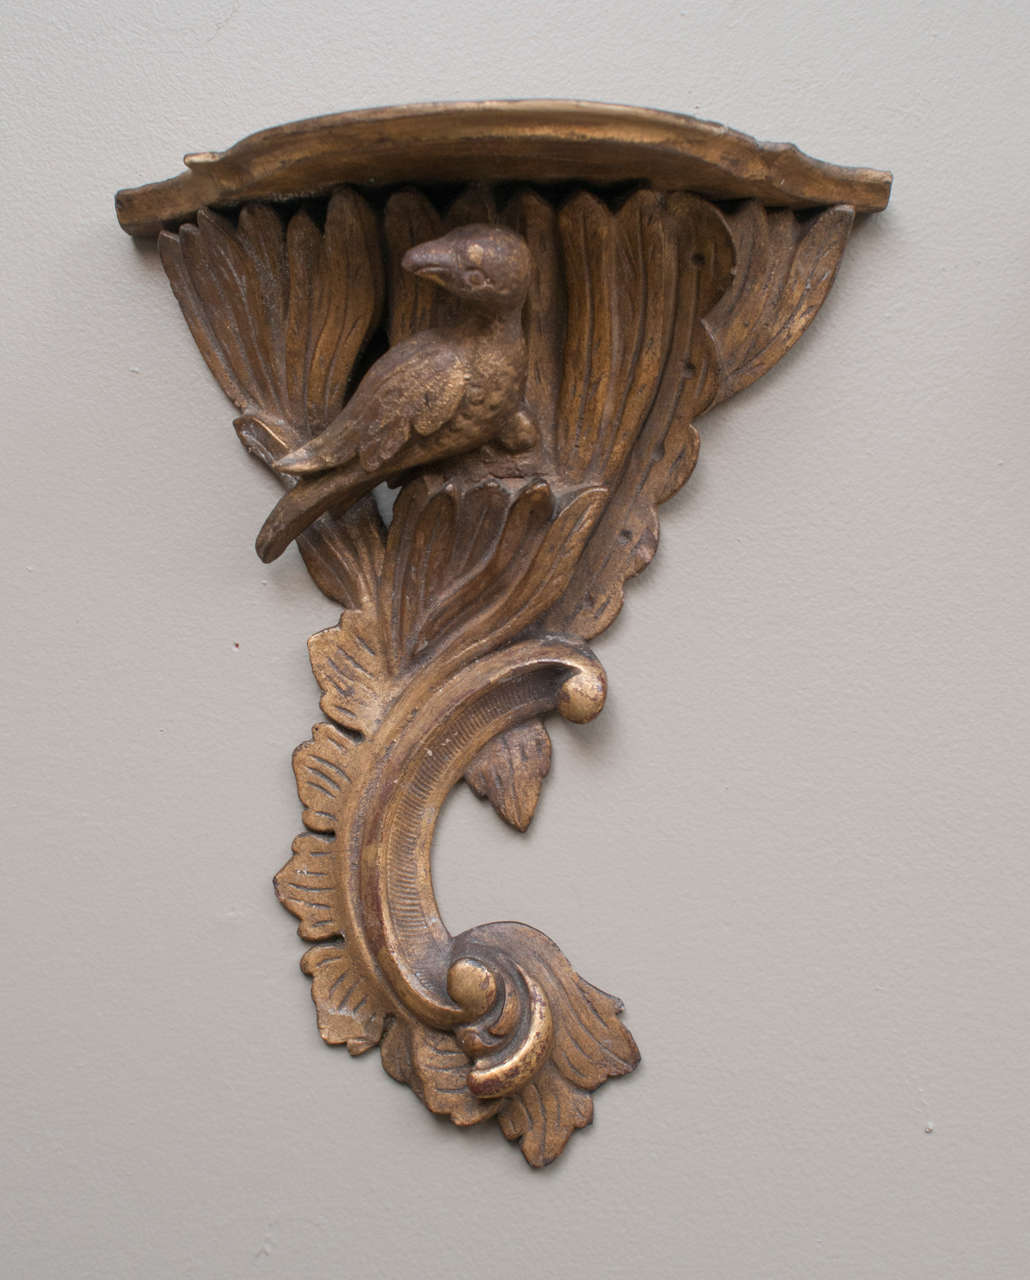 These hand-carved brackets have shaped shelves with acanthus supports and perched doves - rococo style with lovely patina.